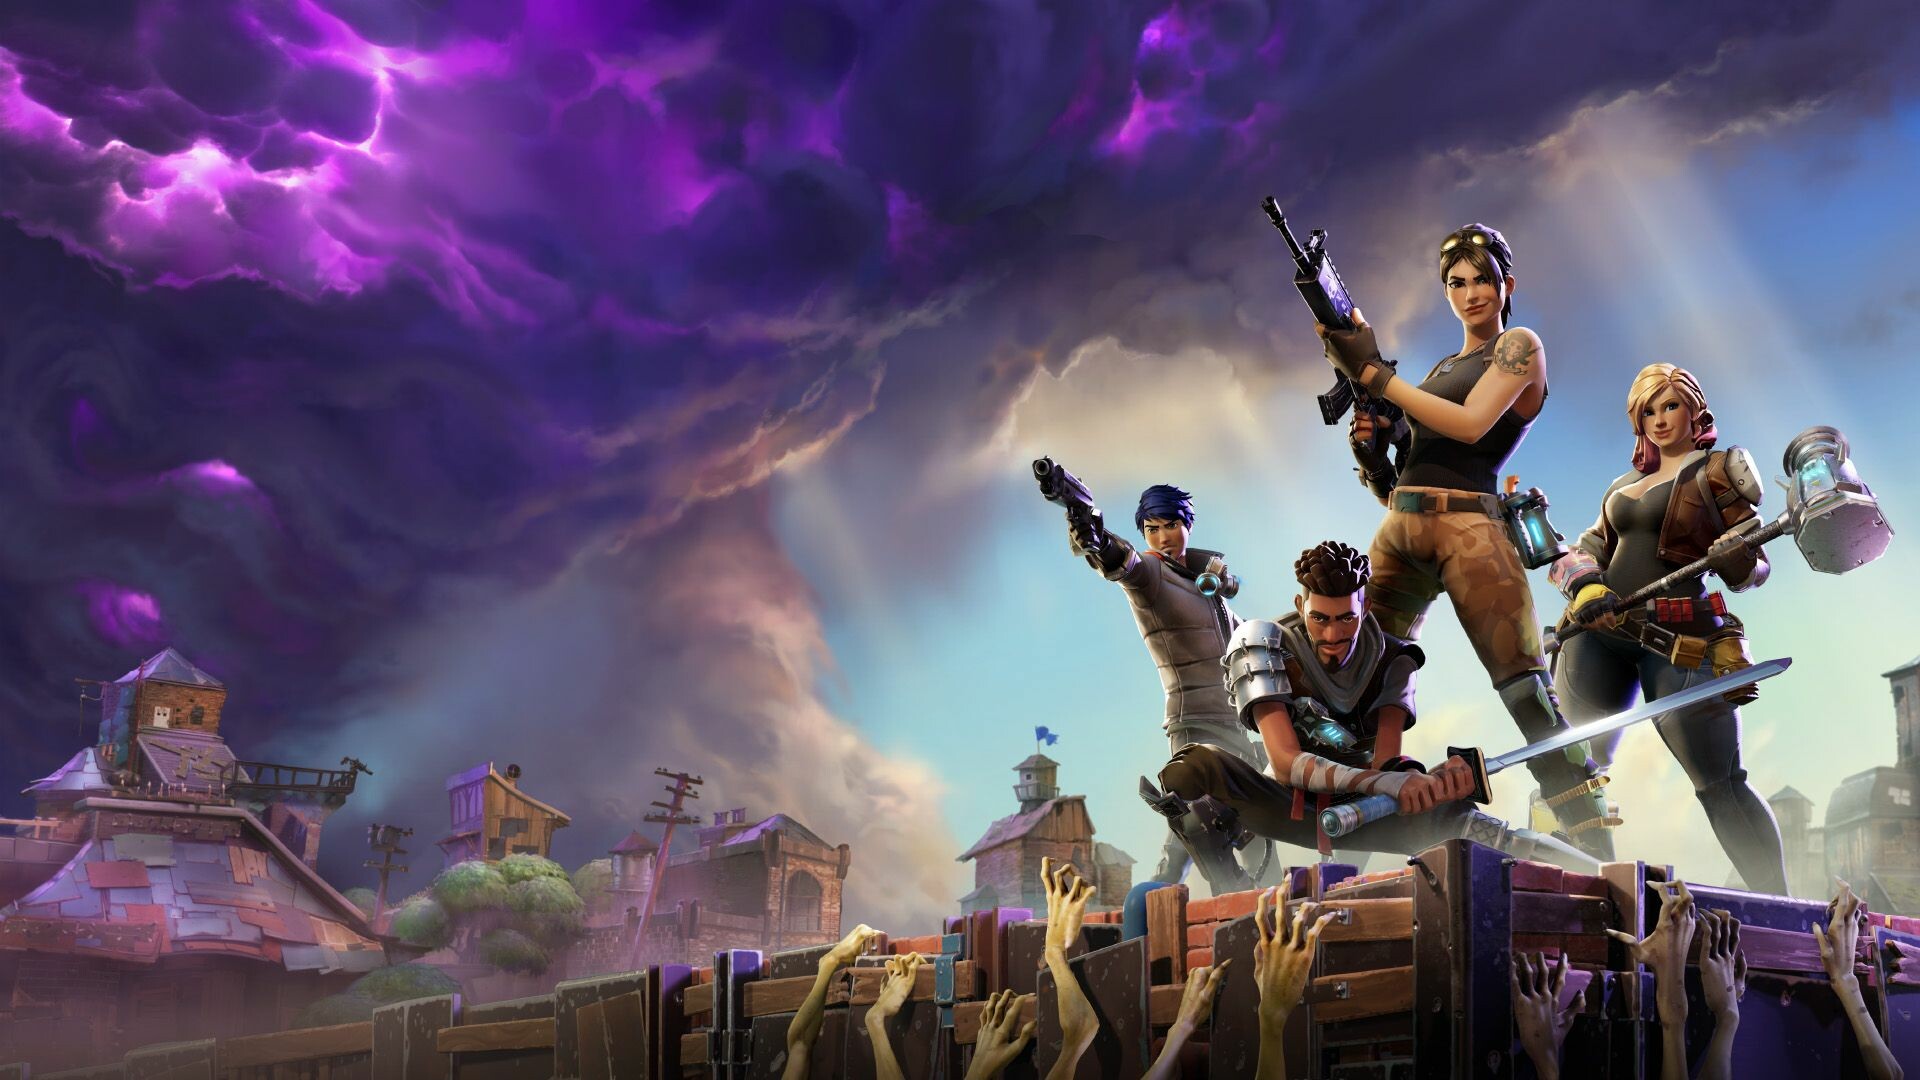 56+ Fortnite Desktop Wallpapers: HD, 4K, 5K for PC and Mobile | Download  free images for iPhone, Android